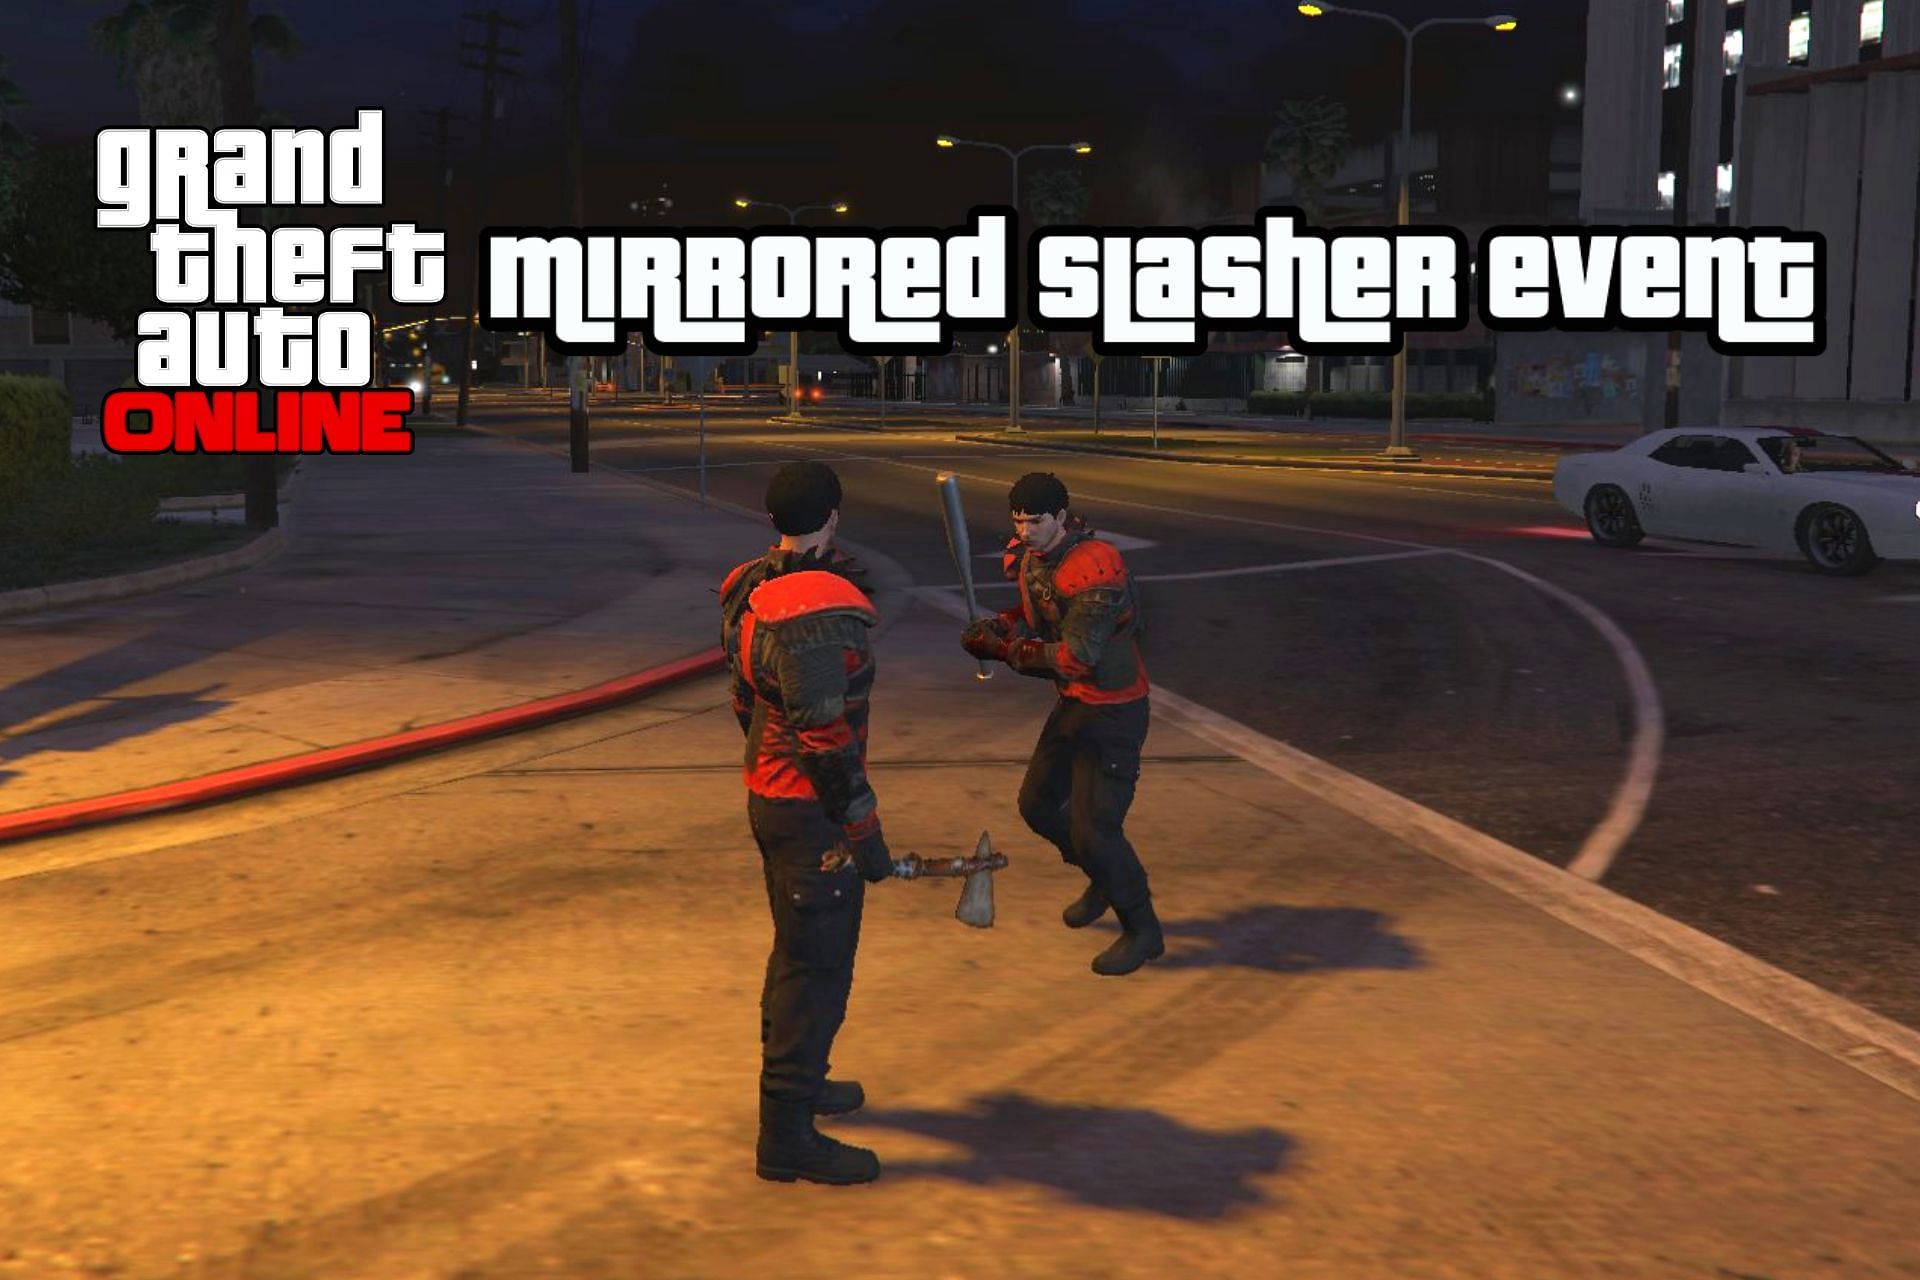 GTA Online players can now face themselves in the new Slashers event (Image via Twitter)